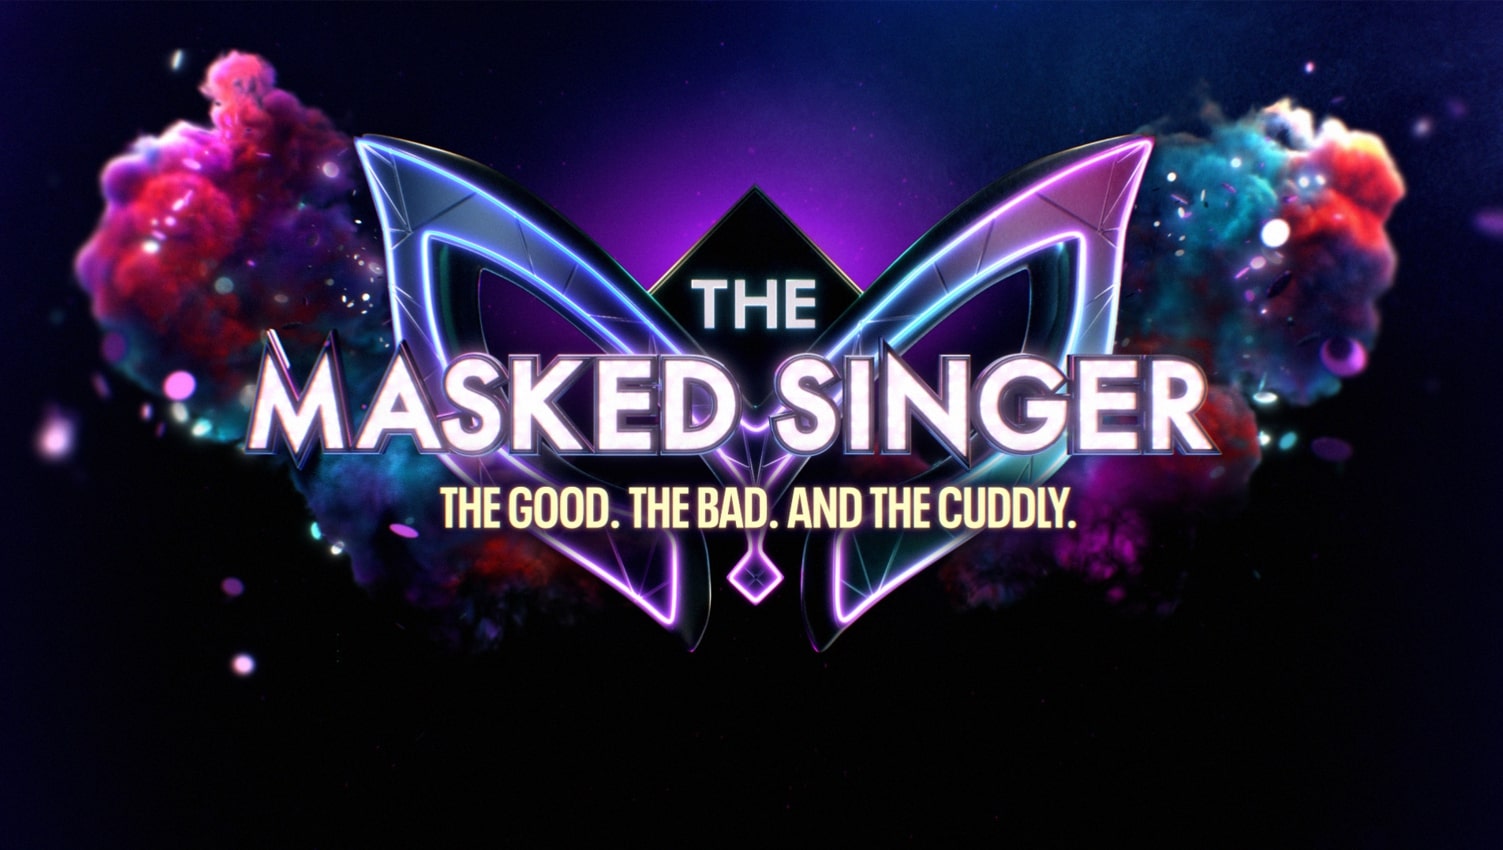 The Masked Singer: A Magical Night